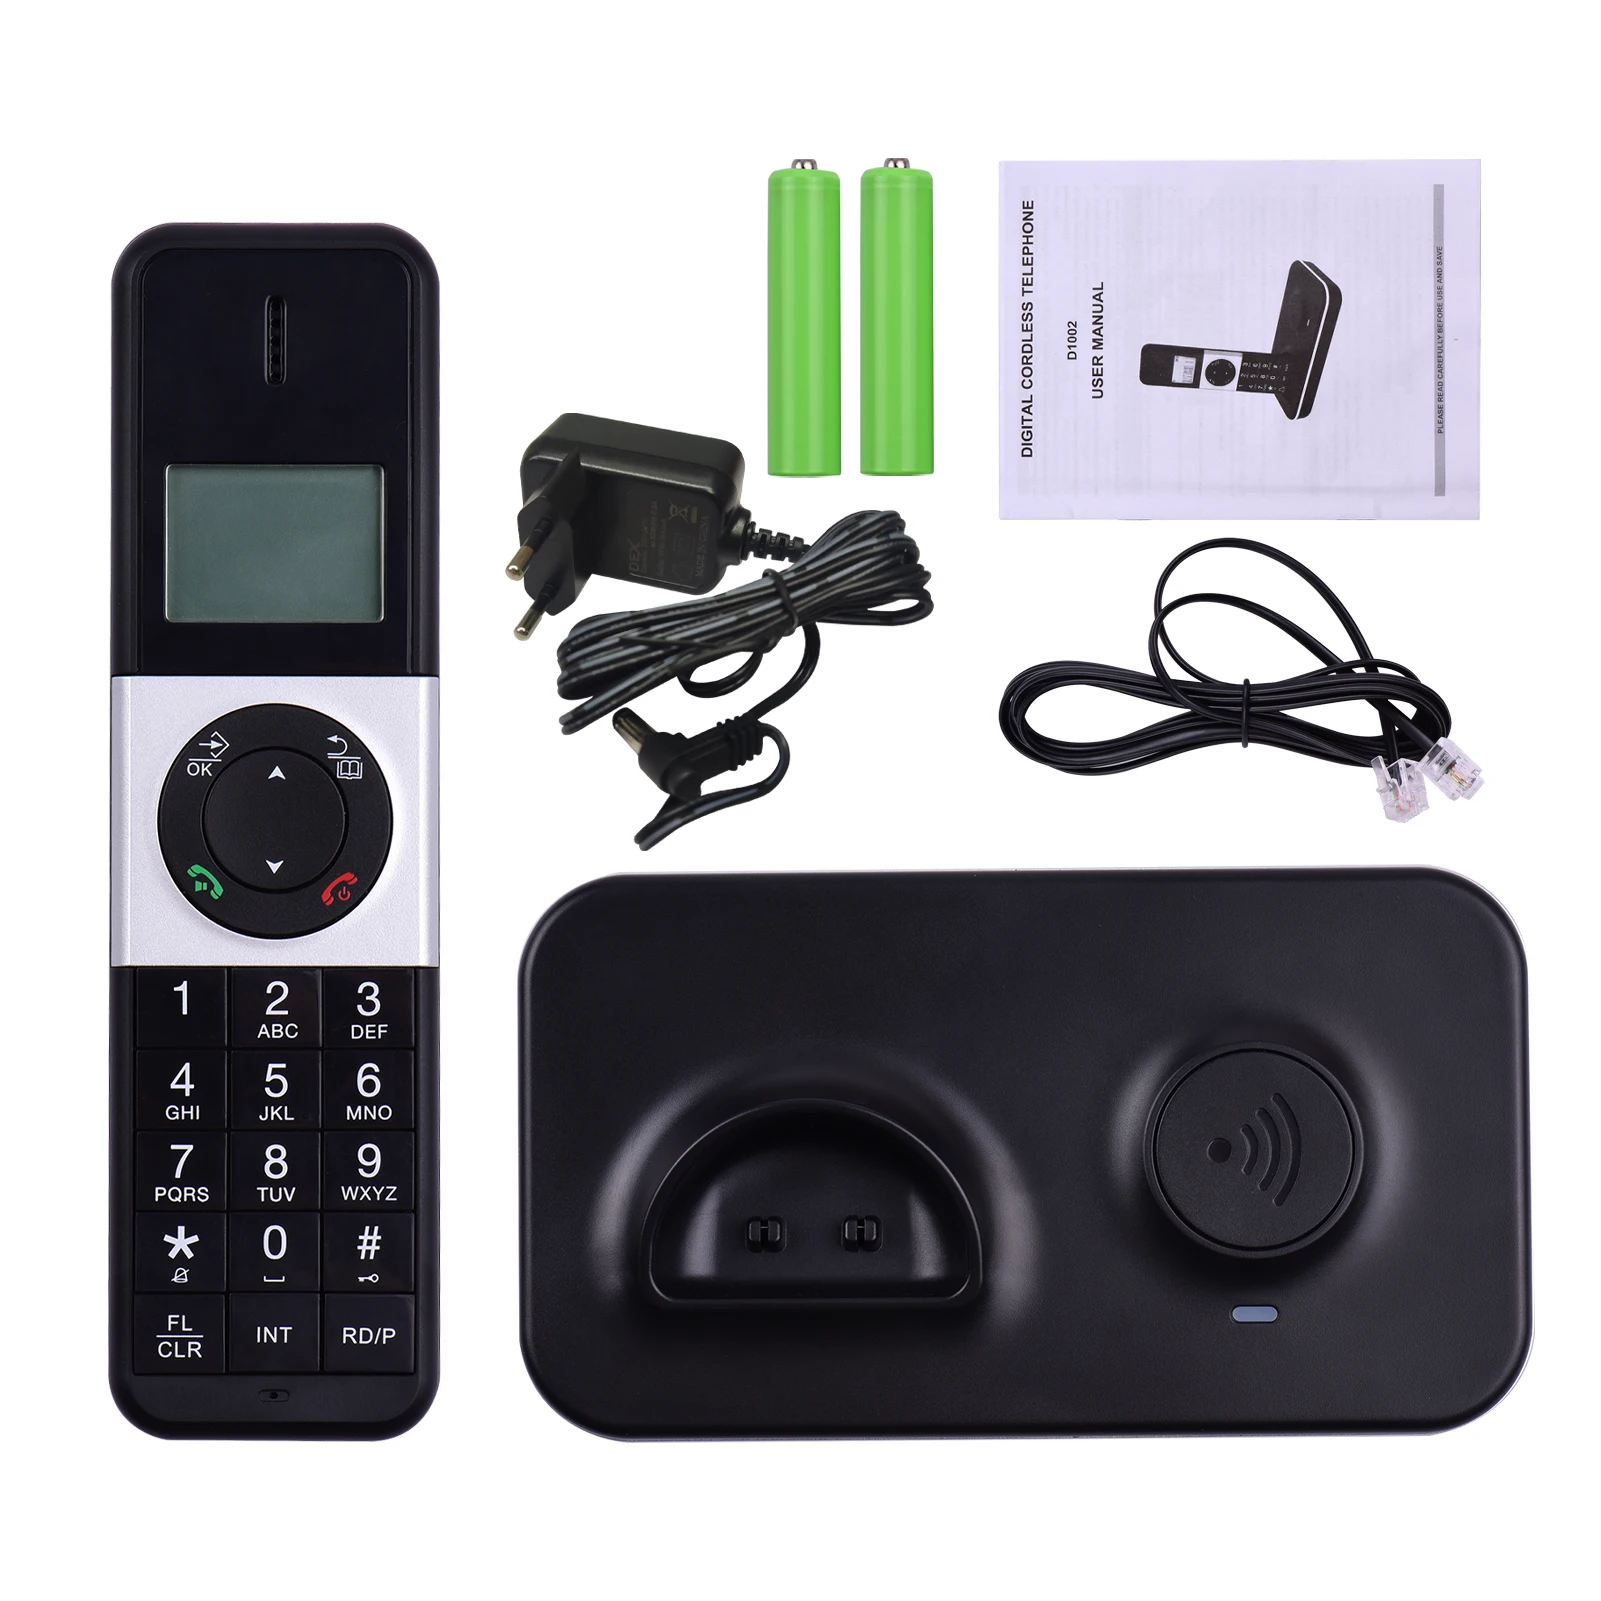 

Digital Cordless Phone Telephone with LCD Display Caller ID Hands-free Calls Conference Call 16 Languages 5 Handsets Connection